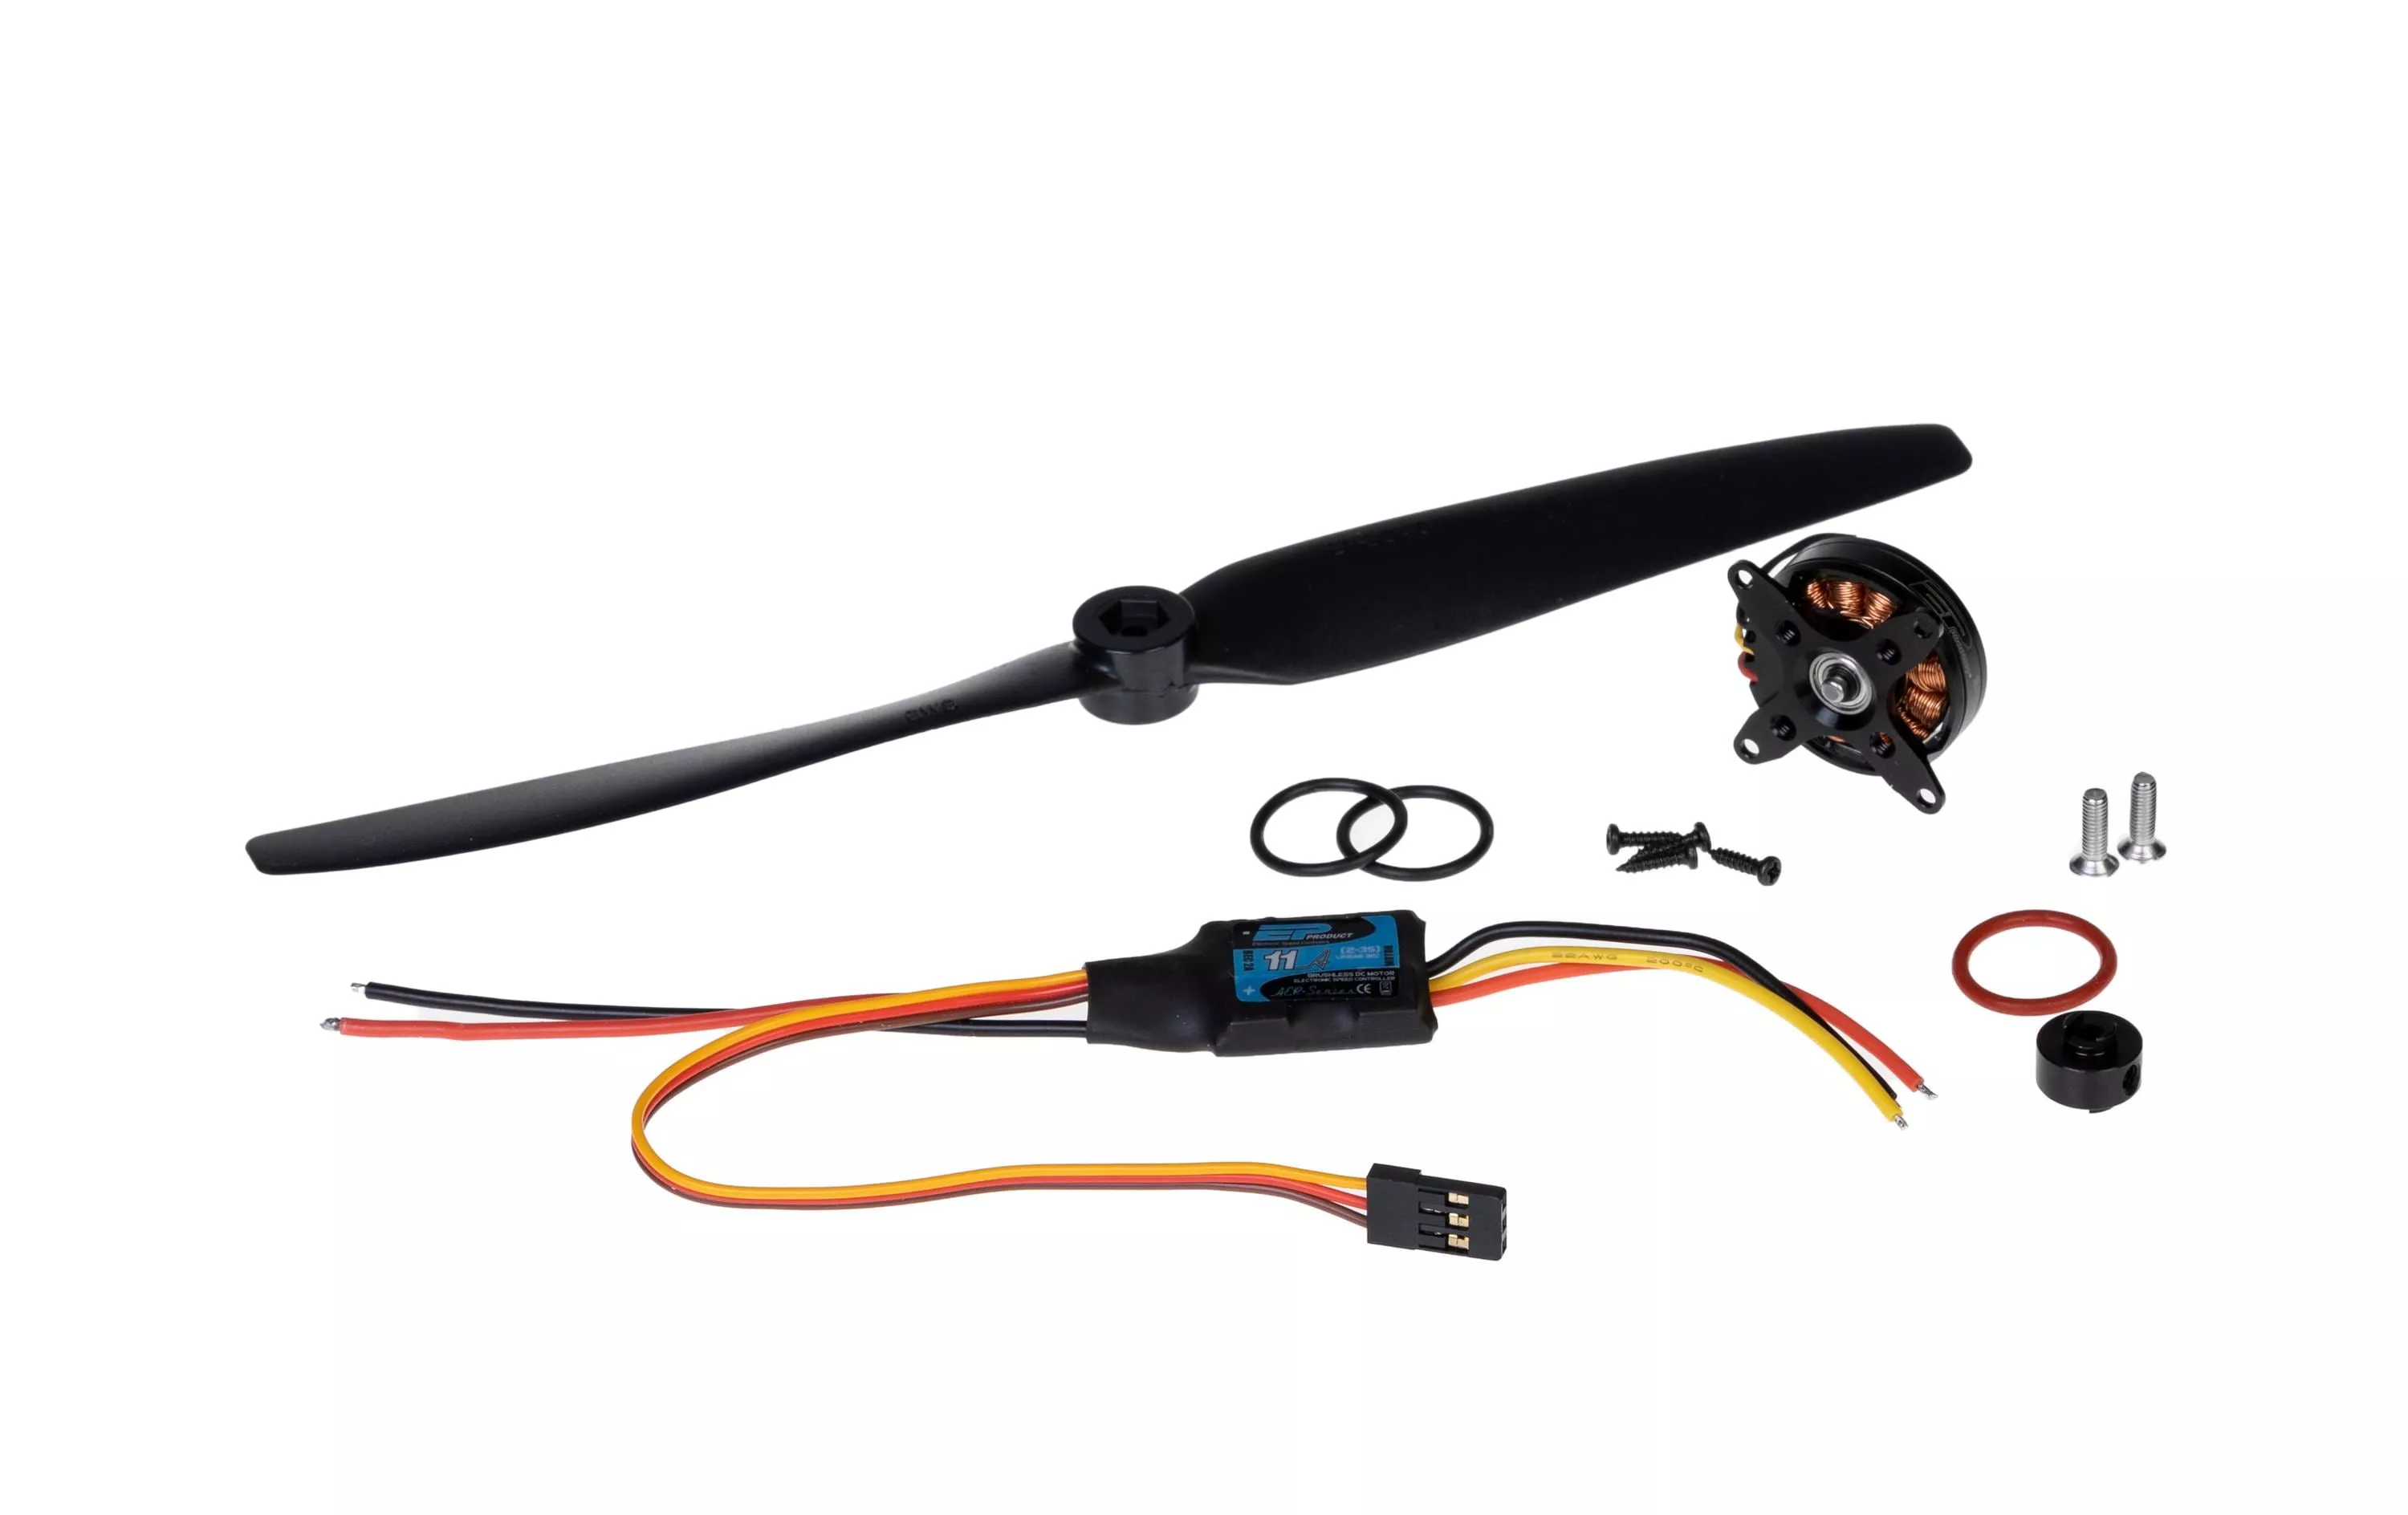 Brushless Drive Set Indoor F3P 2S 2202-1550 KV, 11 A